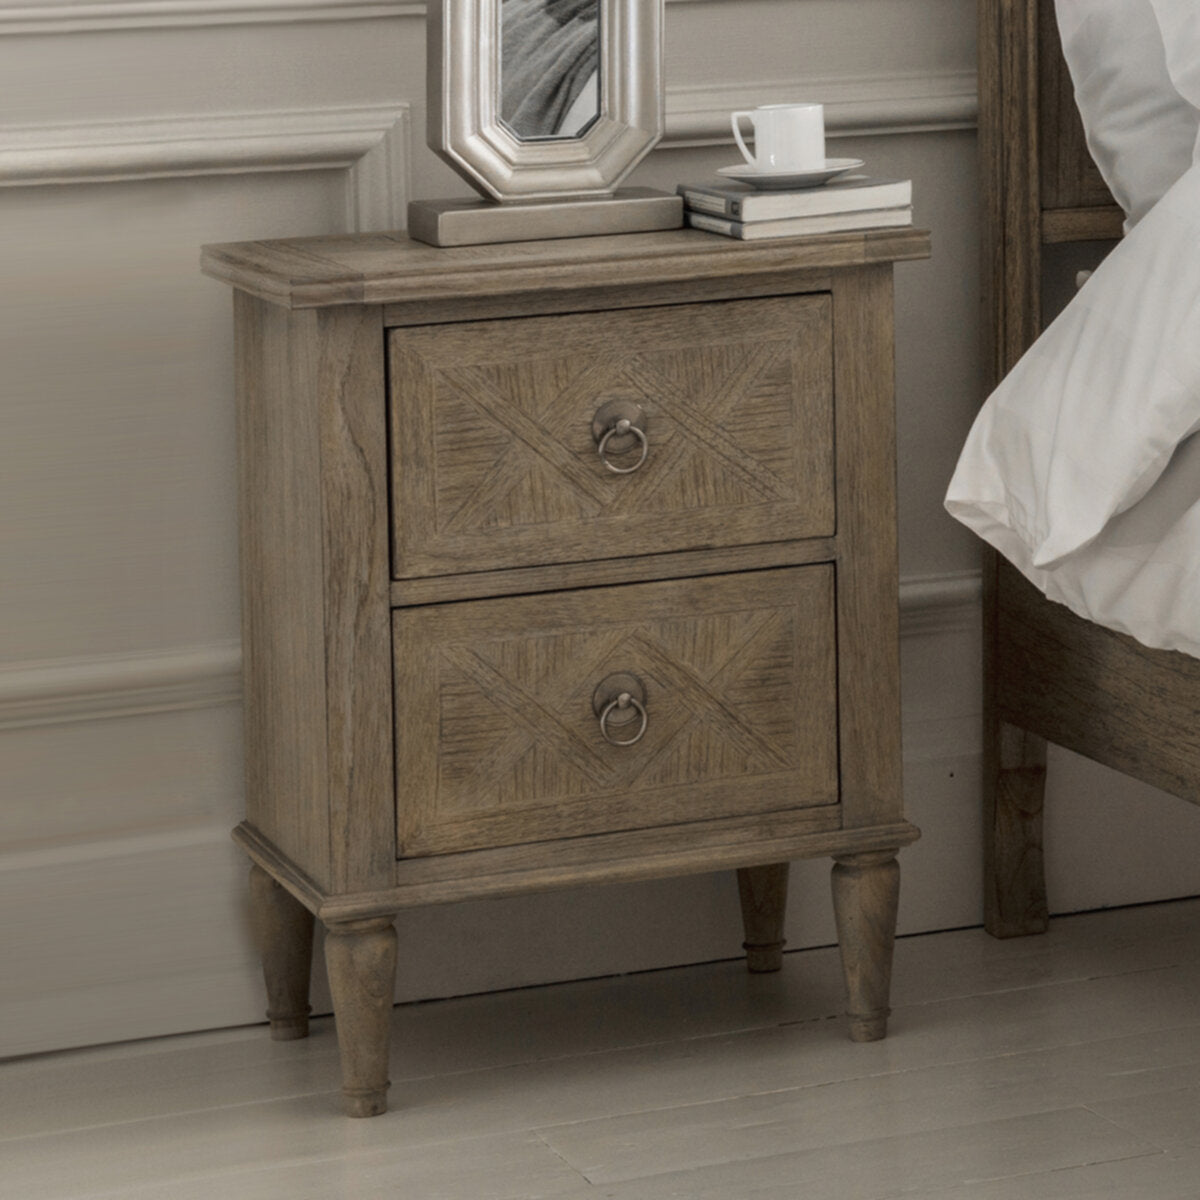 Colonial Parquet Inlay 2 Drawer Bedside Table